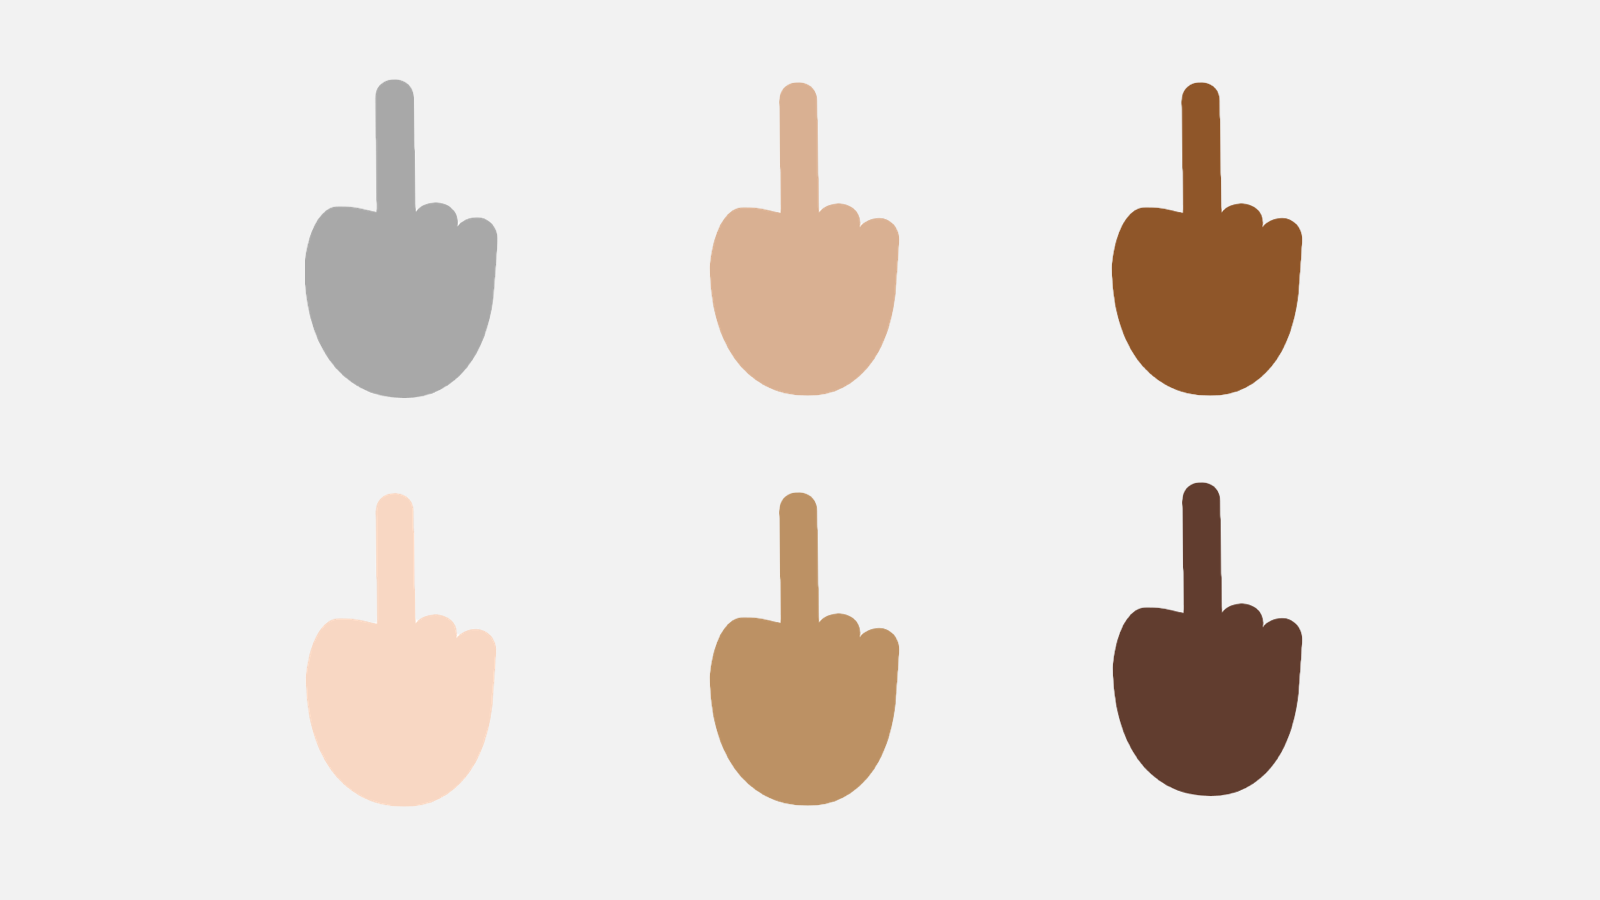 Microsoft Has A Brand New Middle Finger With Your Name On It